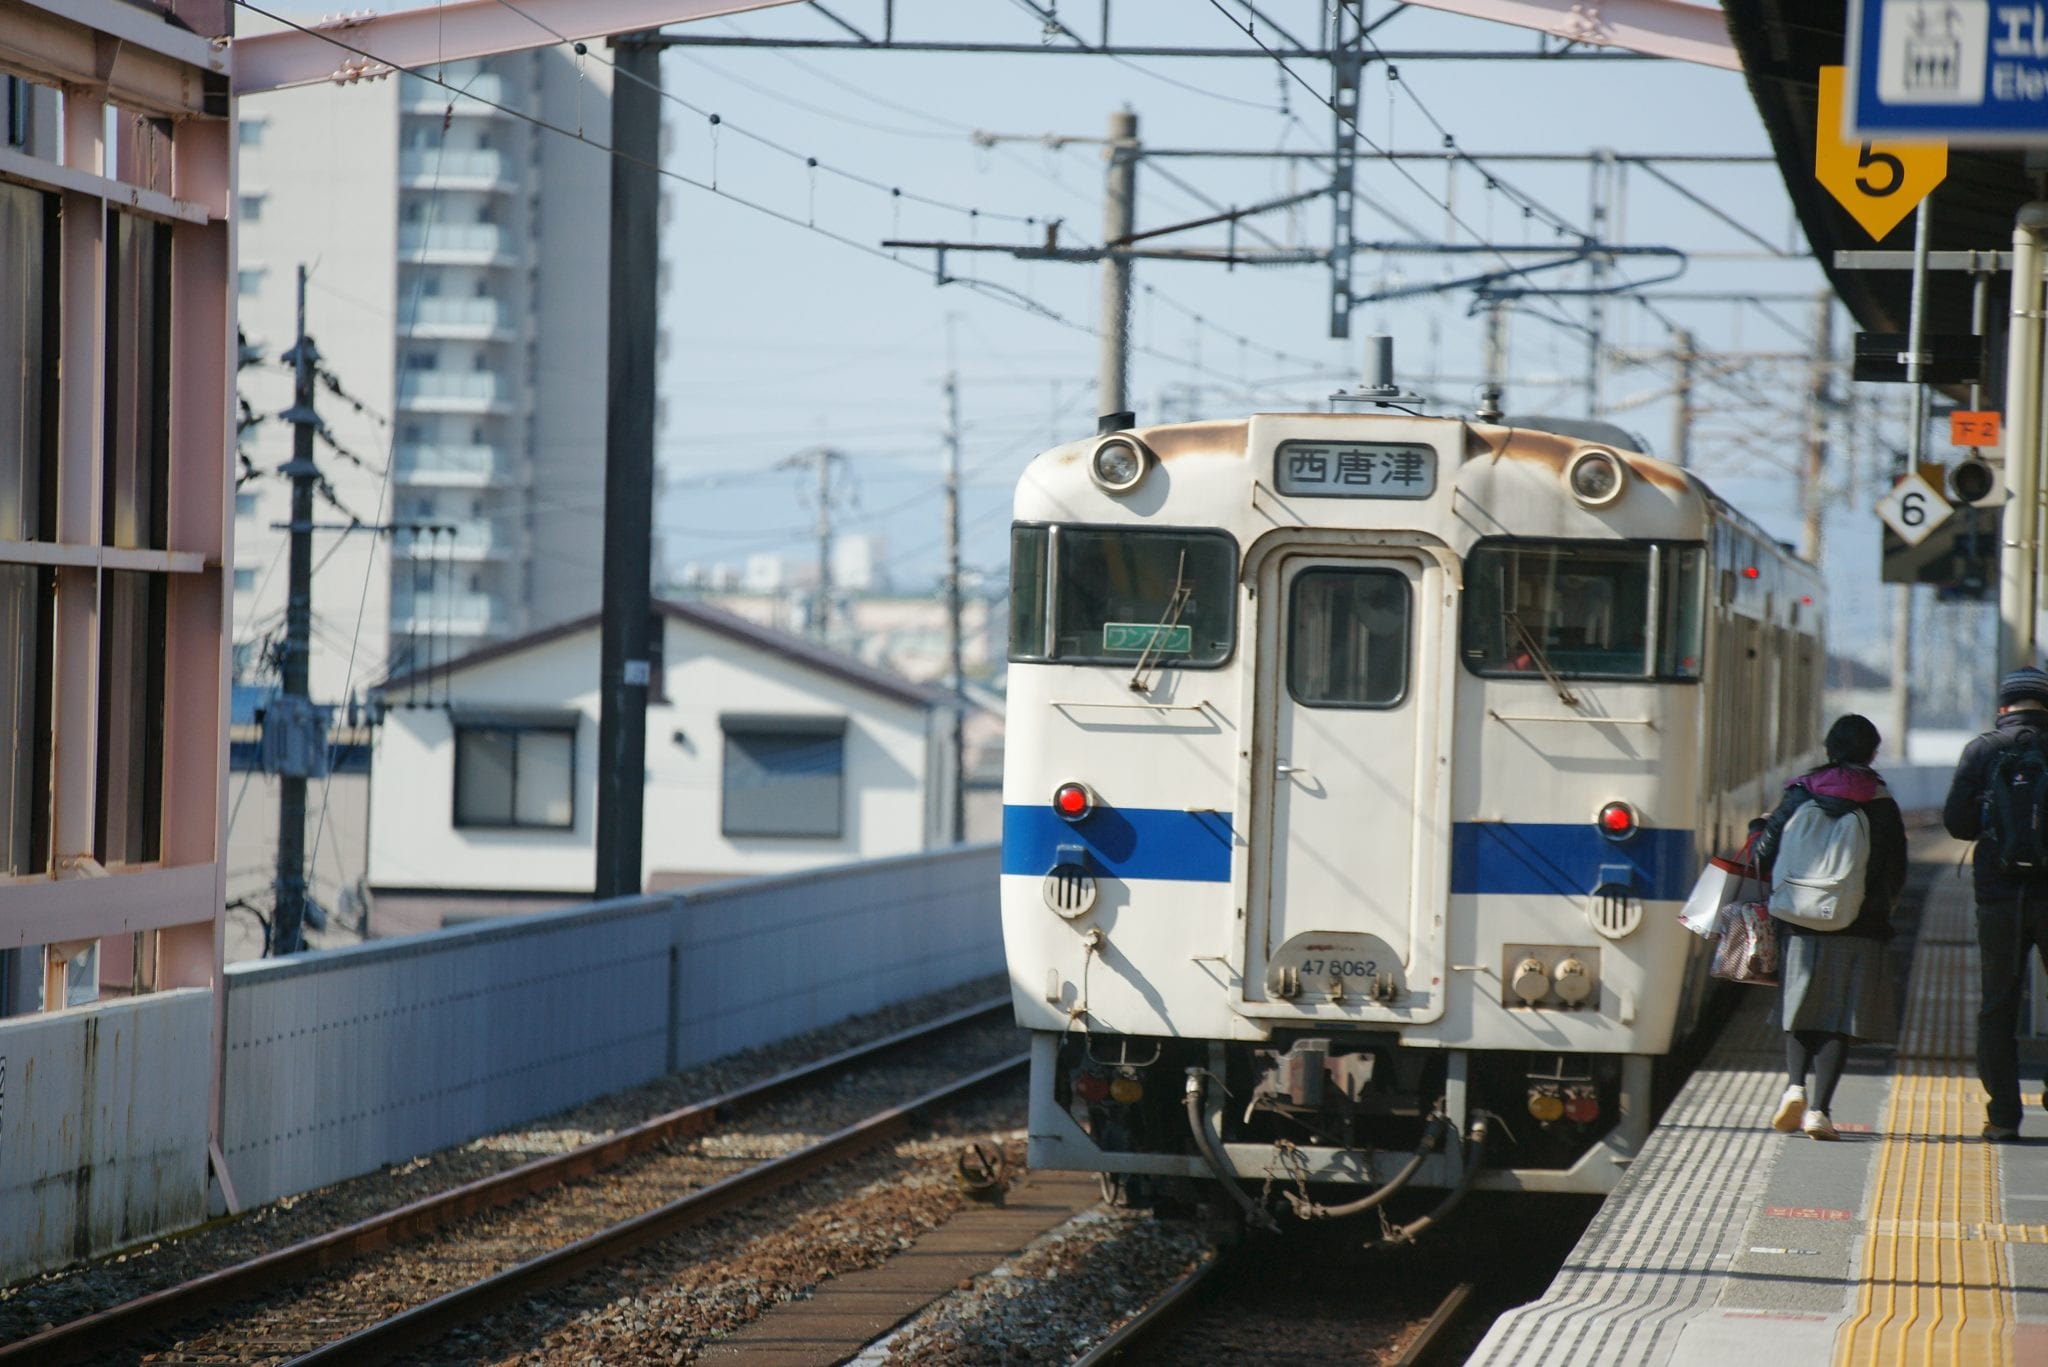 A train arriving at a station